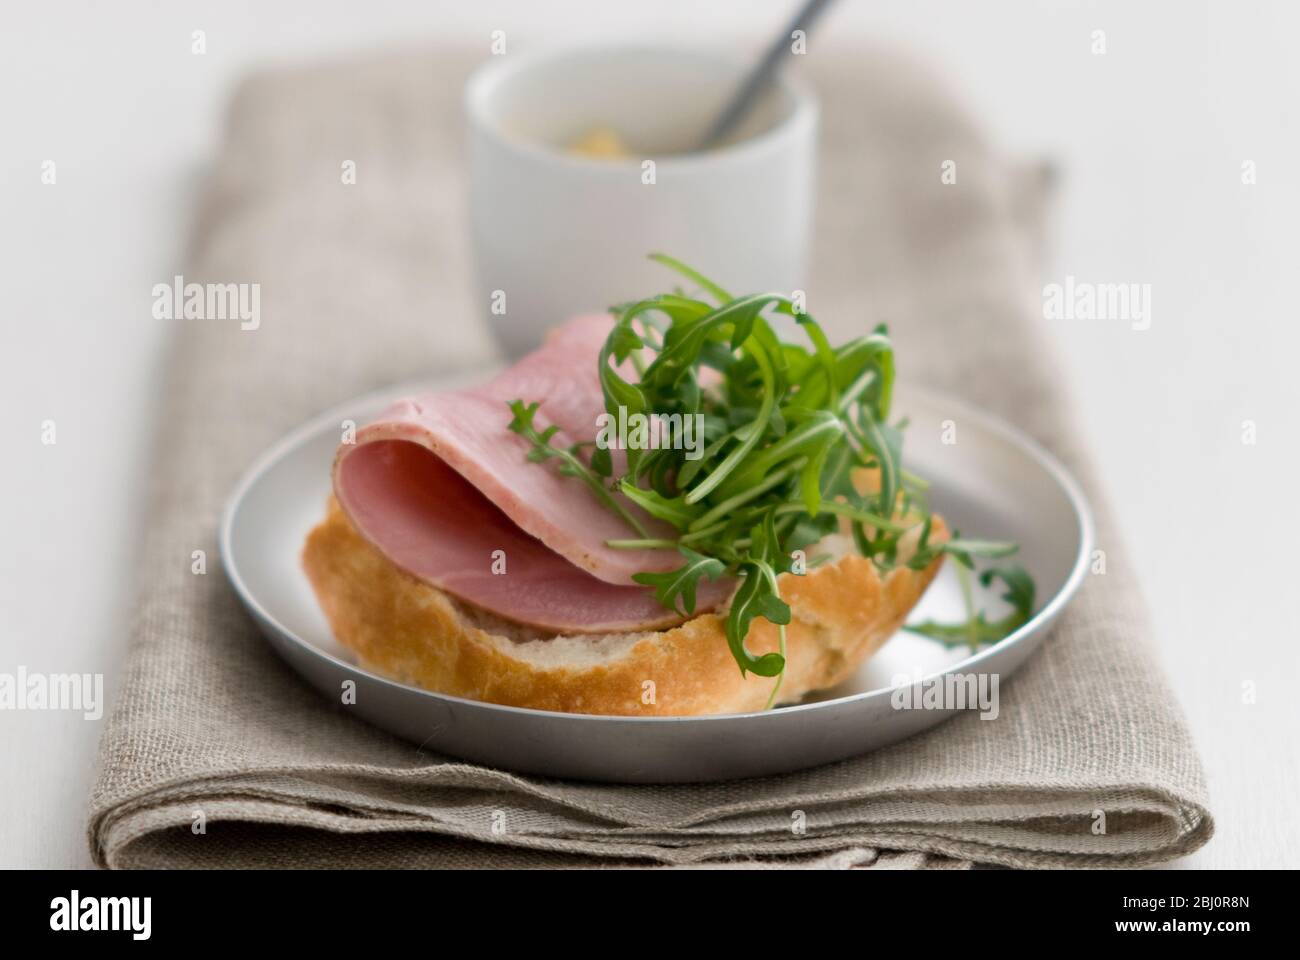 Open sandwich of crusty pain rustique roll, with thick slice of quality ham and rocket salad leaf garnish, with small pot of Dijon mustard - Stock Photo